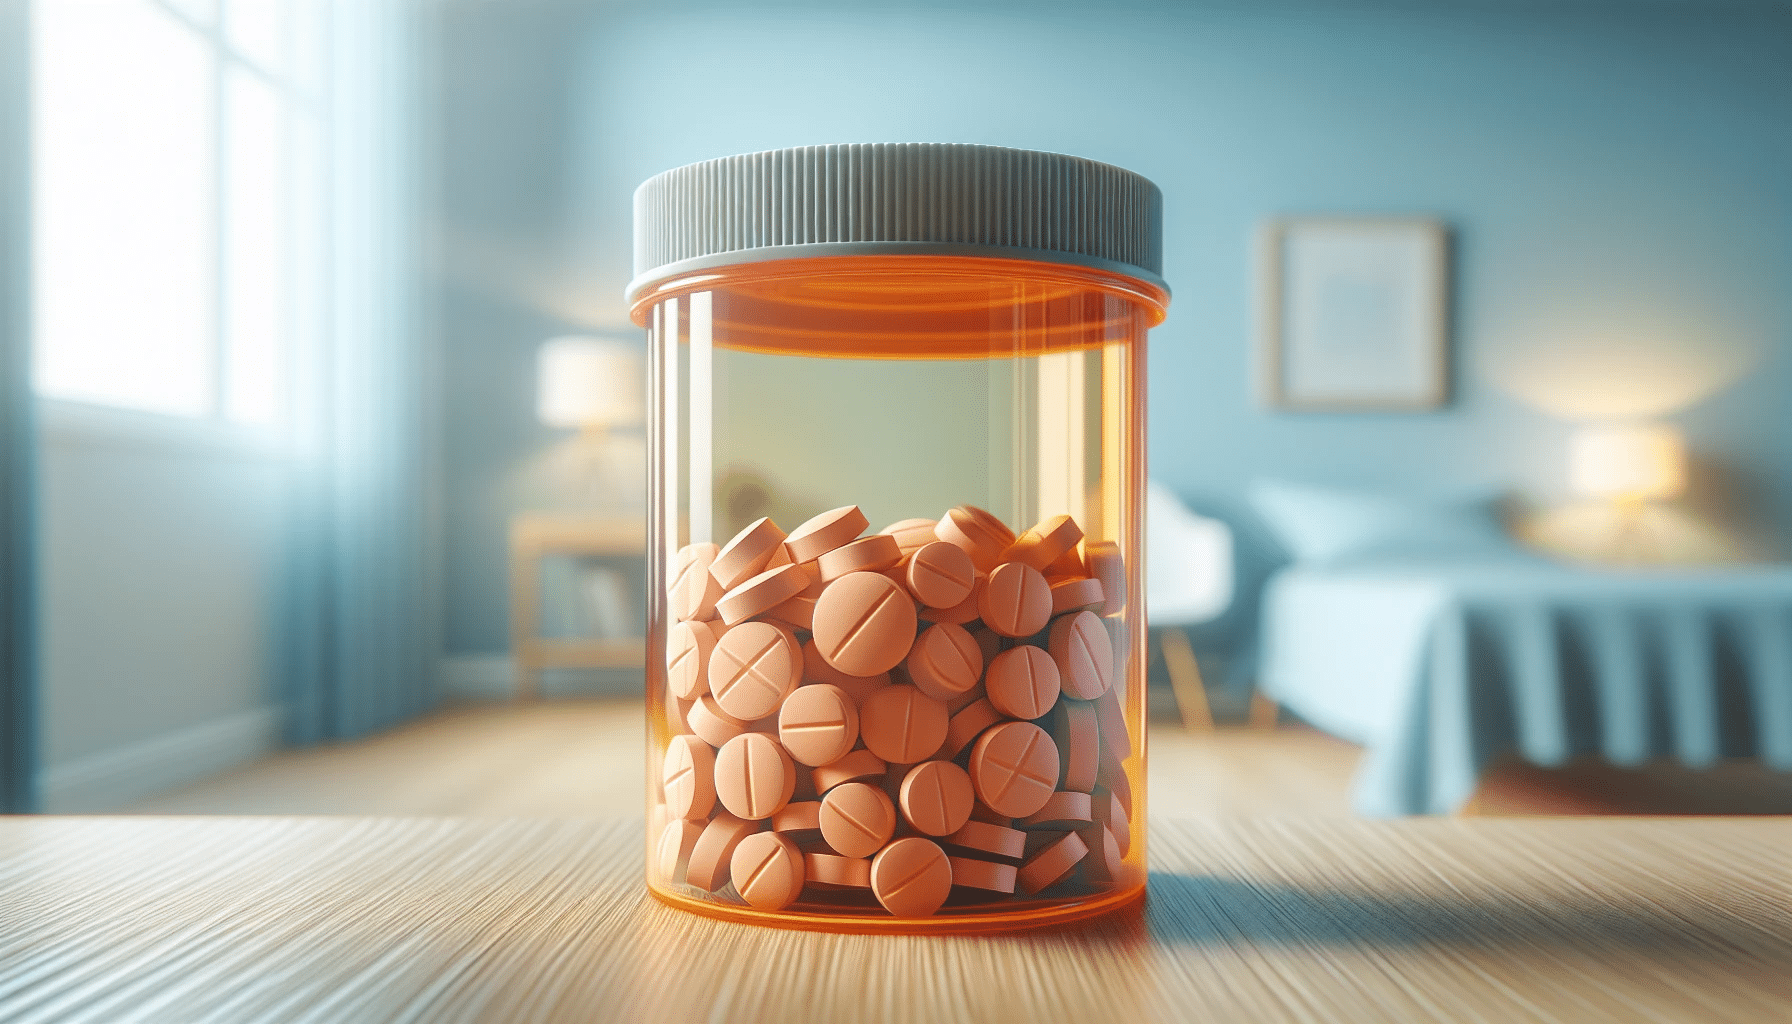 Illustration of a prescription stimulant pill bottle with the label 'Adderall' blurred in the background